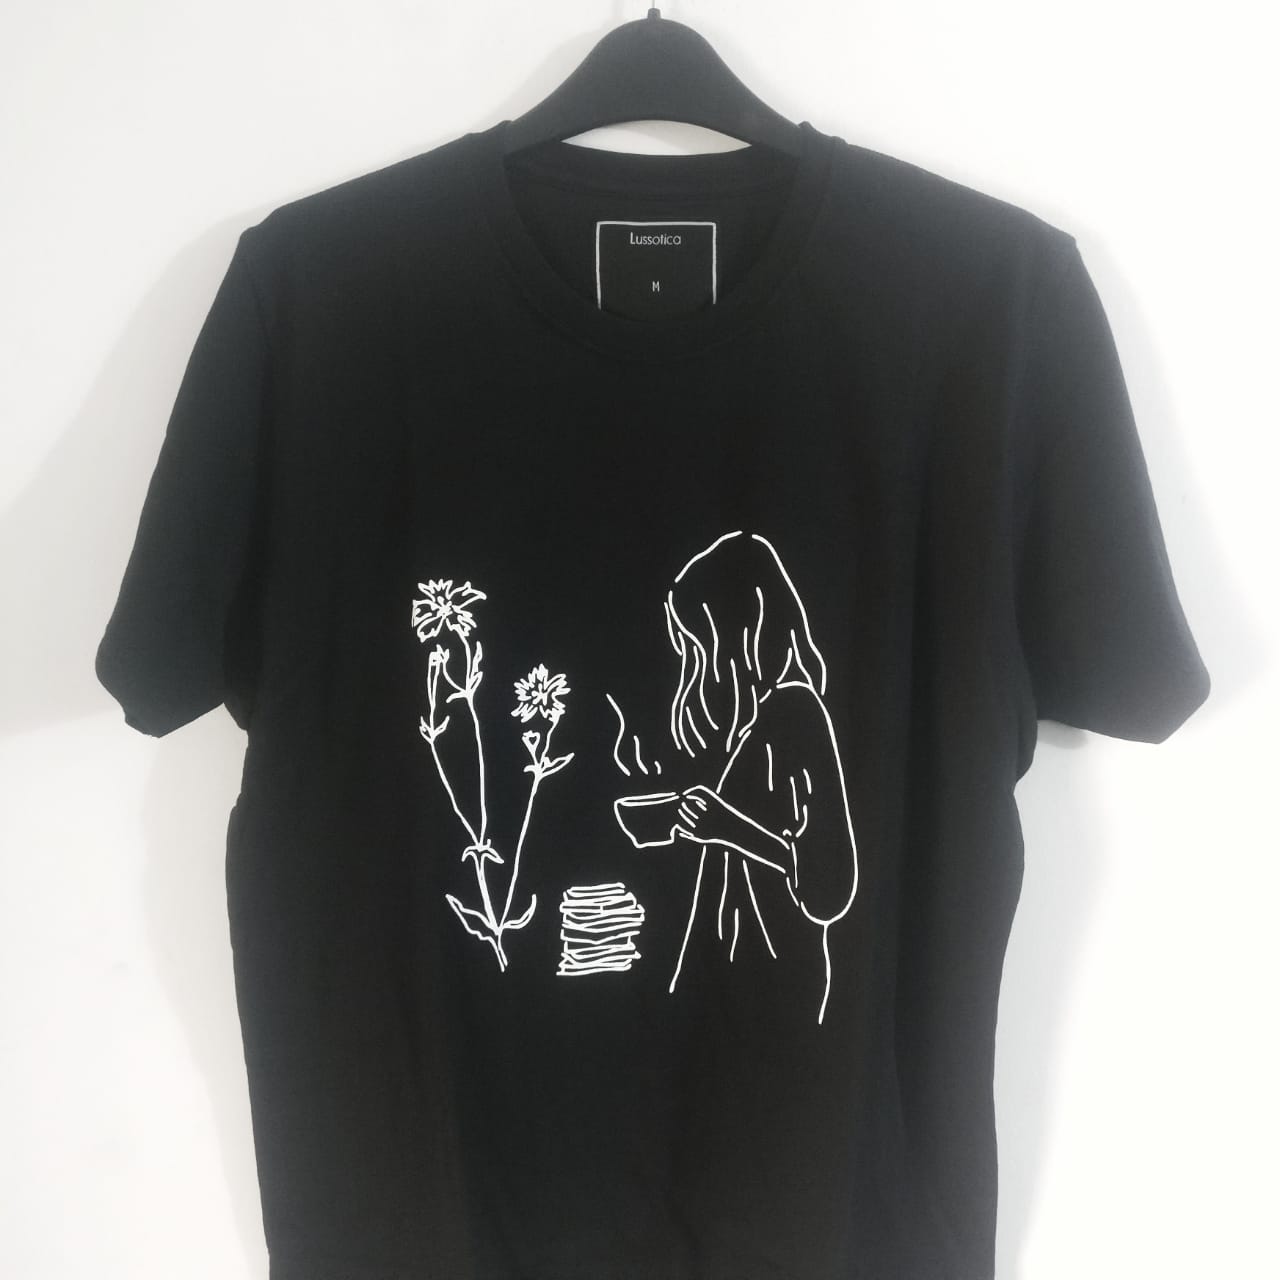 Graphic Tees by Lussotica - Girl W/ Plants